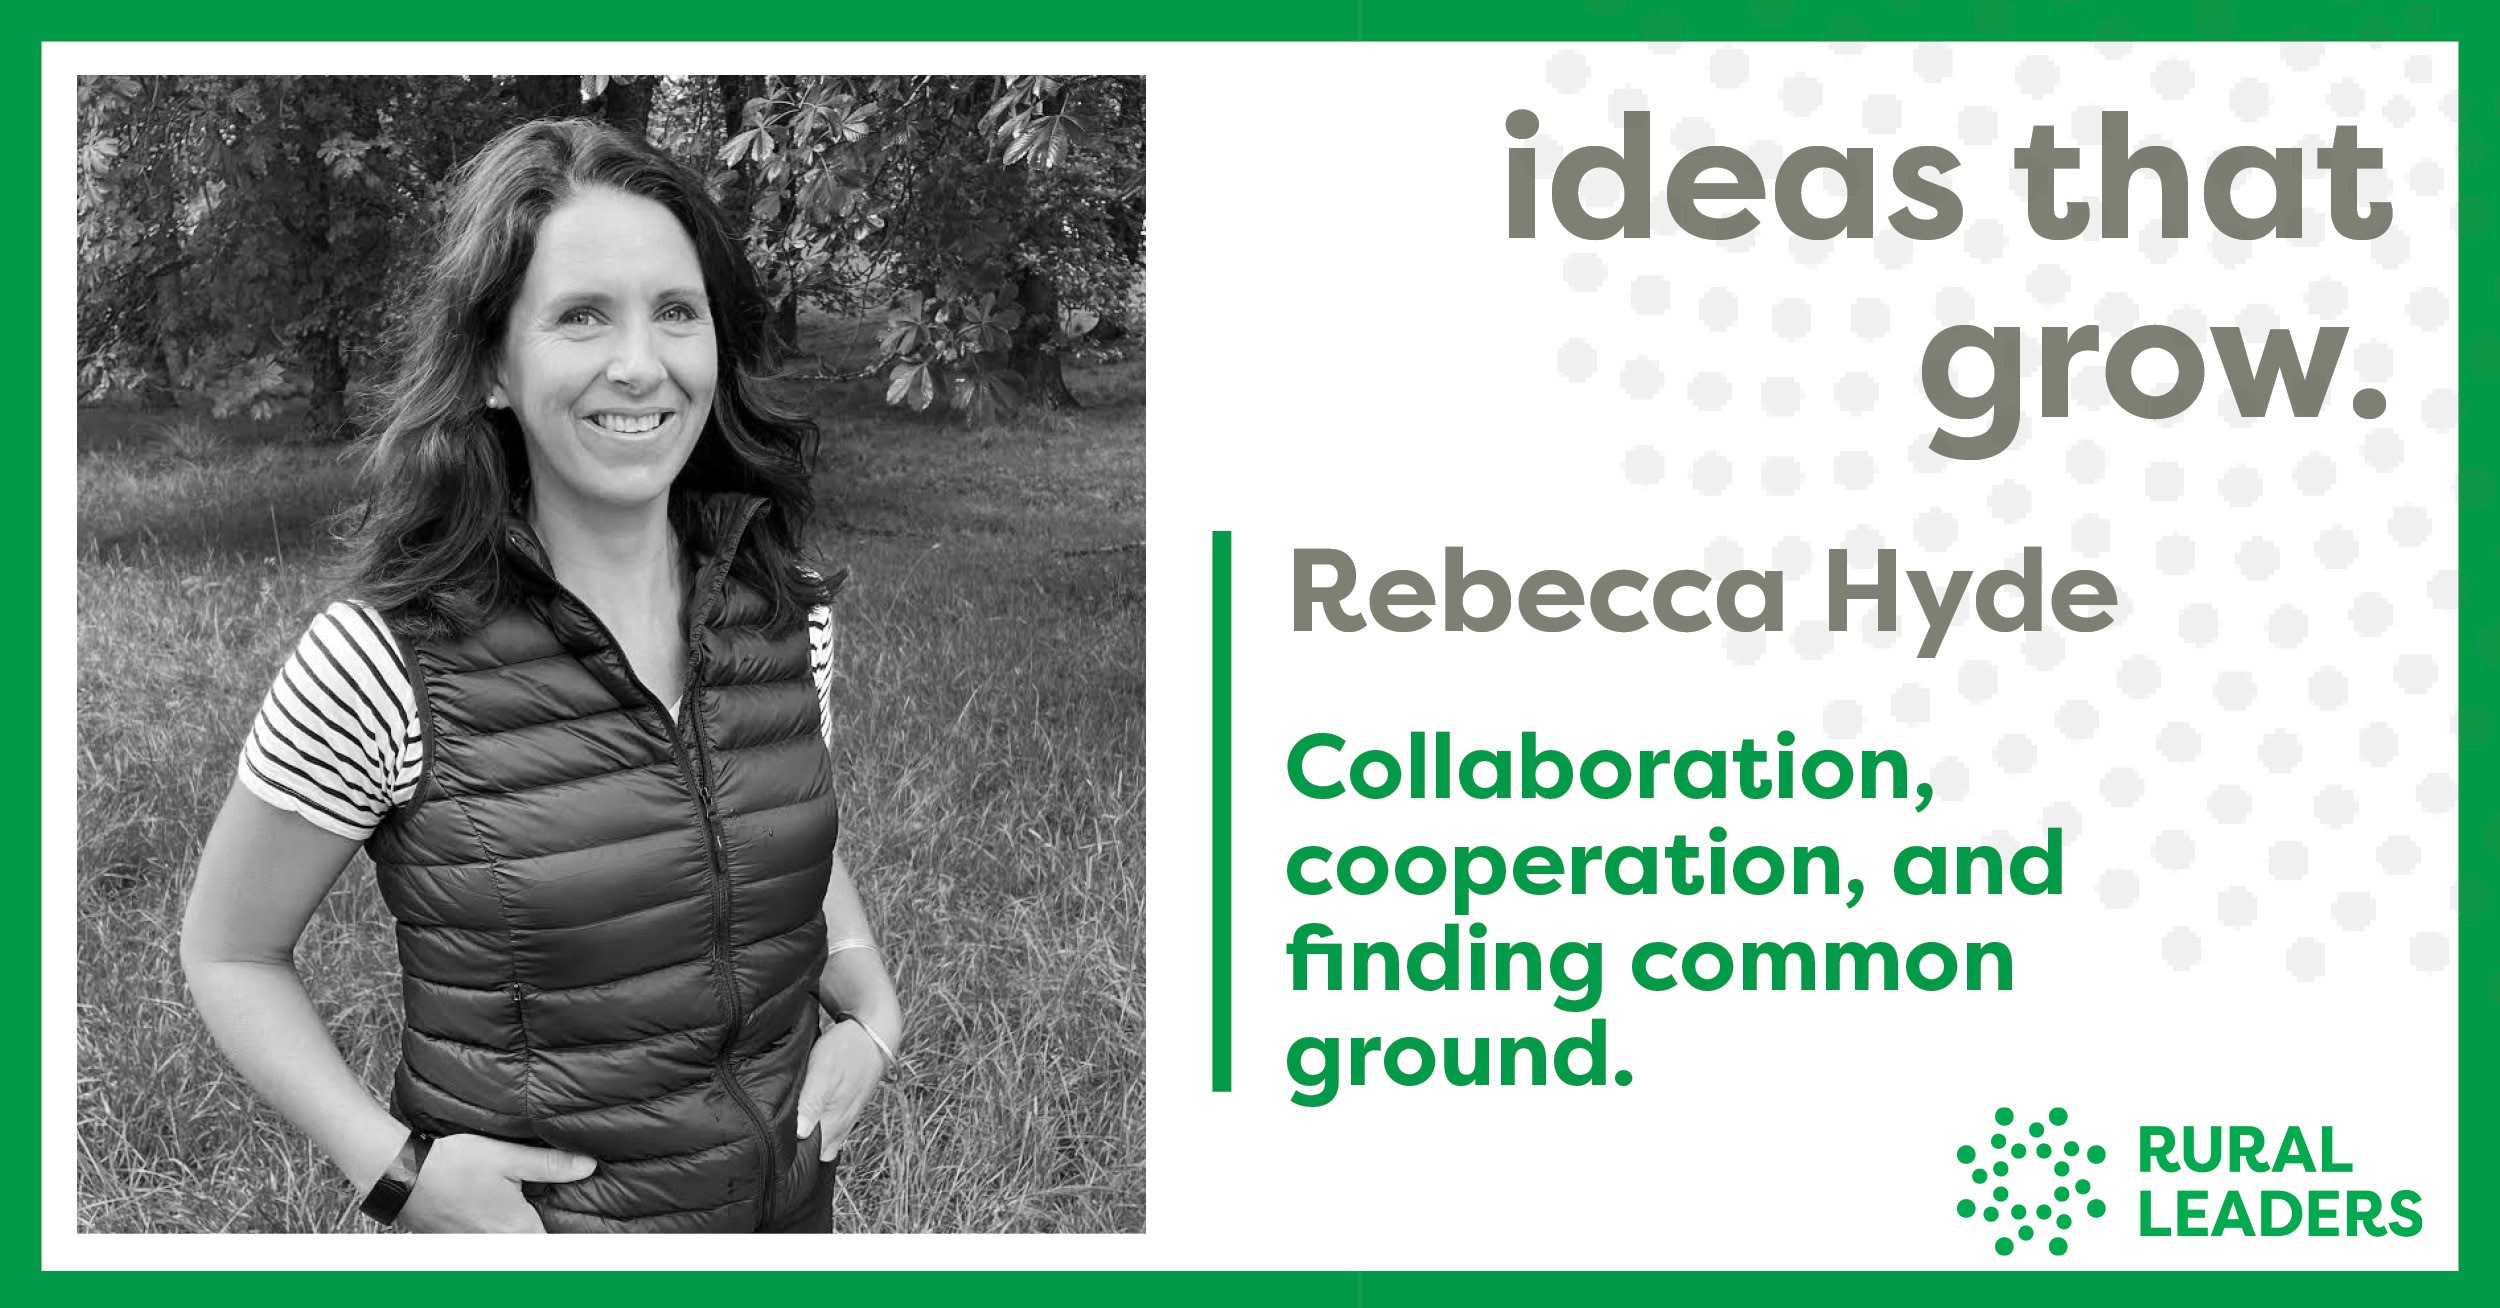 Rebecca Hyde - Ideas that grow podcast interview